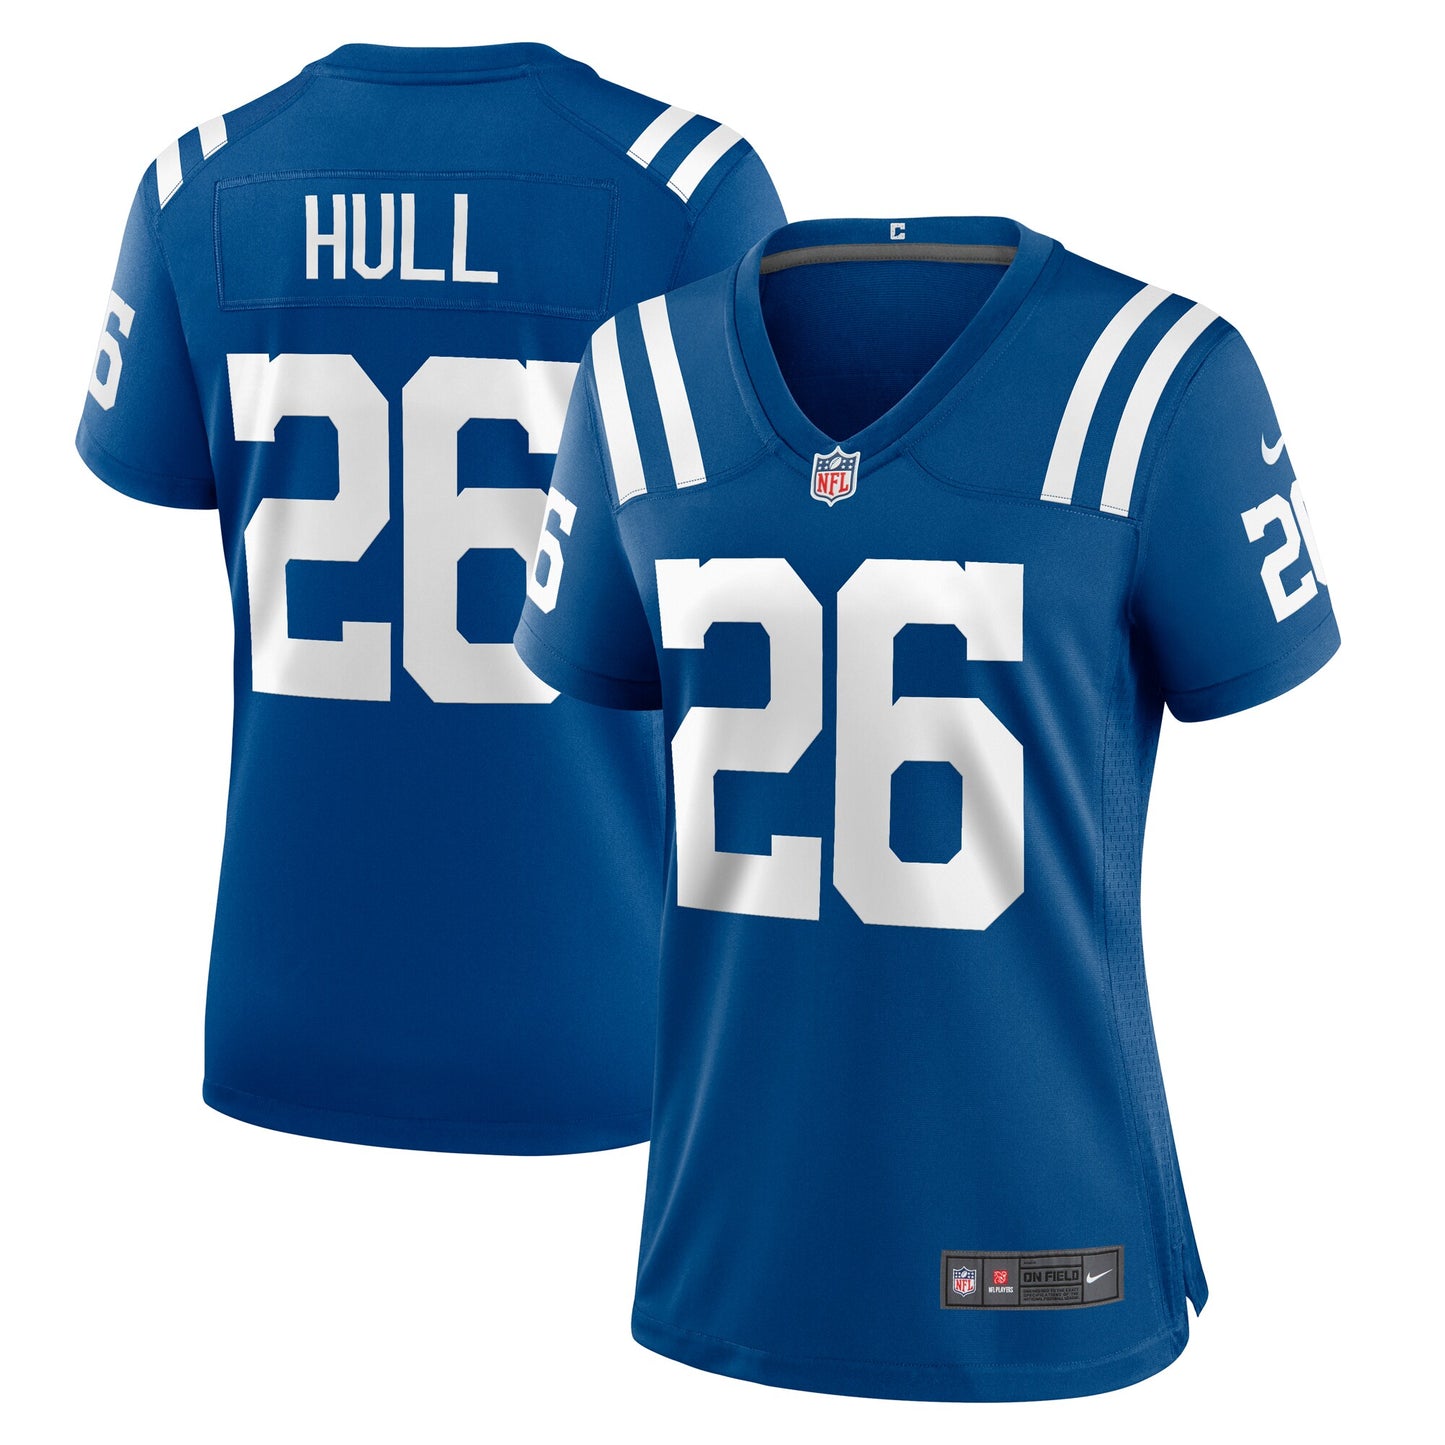 Evan Hull Indianapolis Colts Nike Women's Team Game Jersey - Royal